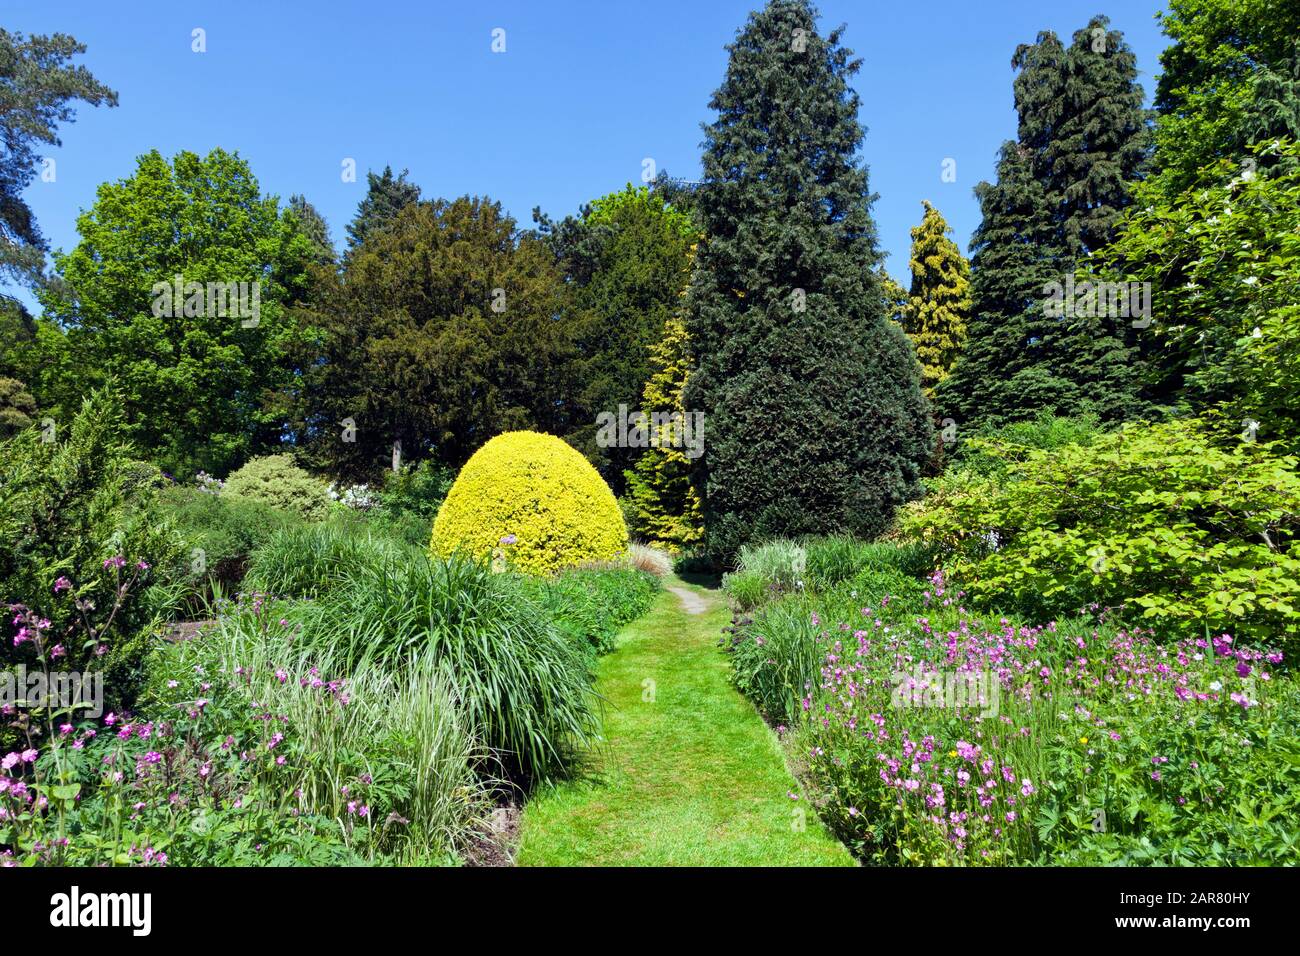 Grass winding path through pink flowers, ornamental plants, conifer and leafy trees in a charming English garden . Stock Photo